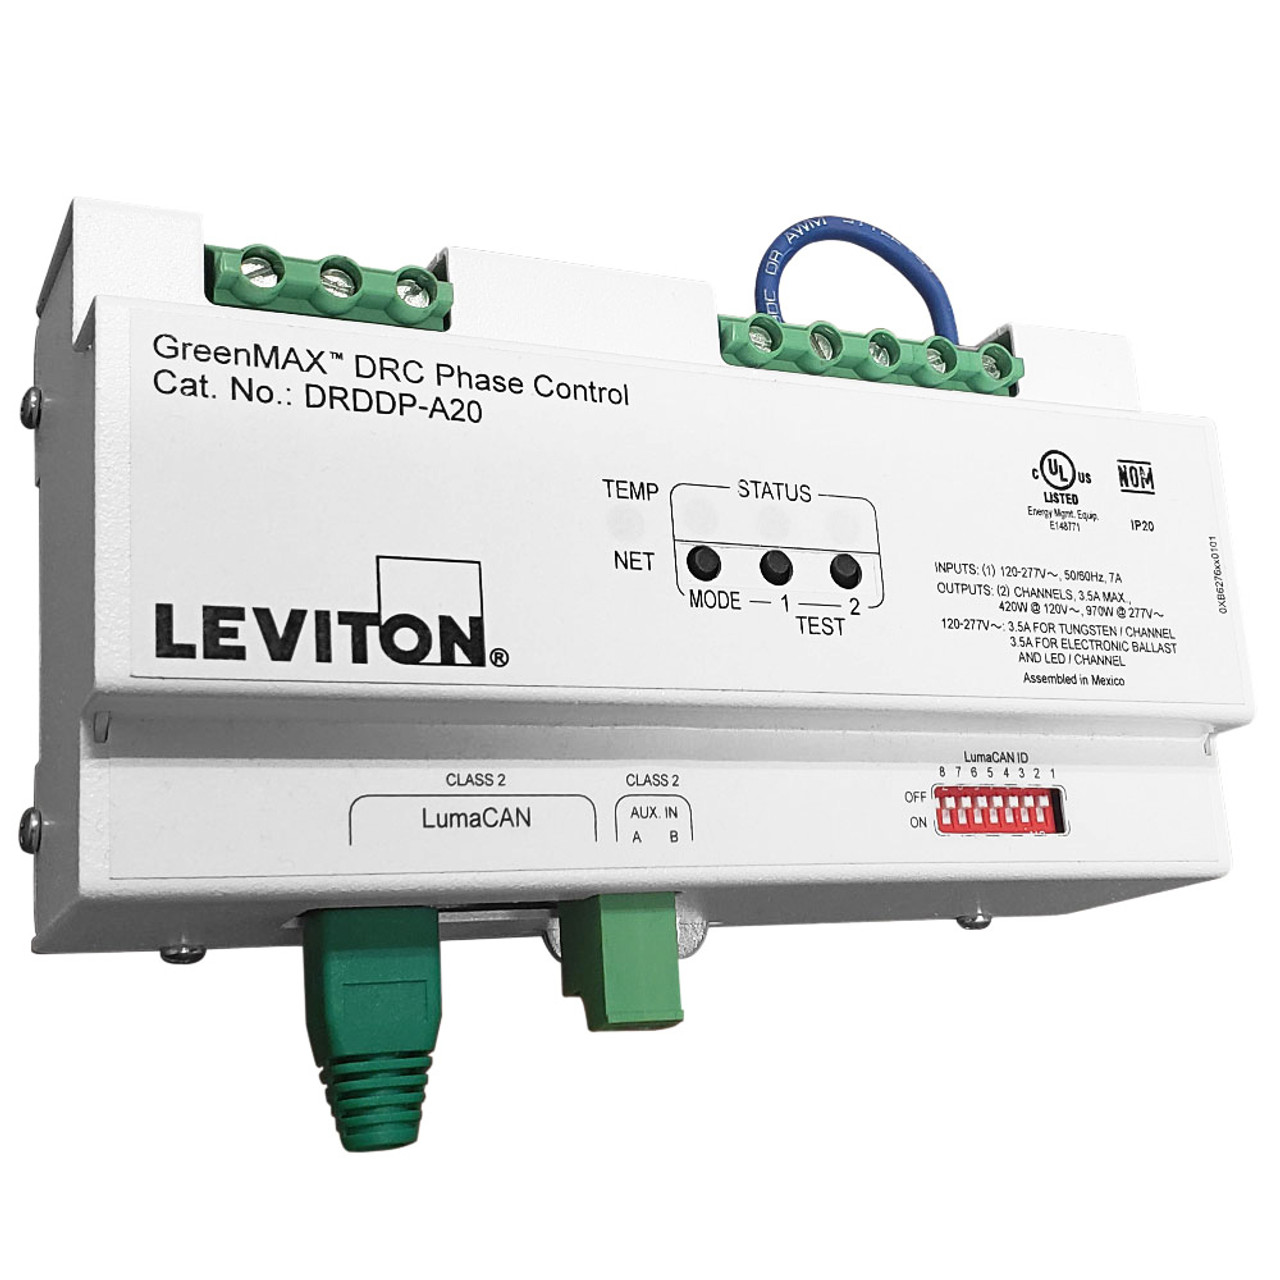 Leviton DRDDP-A20 GreenMAX® DRC Phase Control 2 Channel Dimmer (DRDDP-A20)